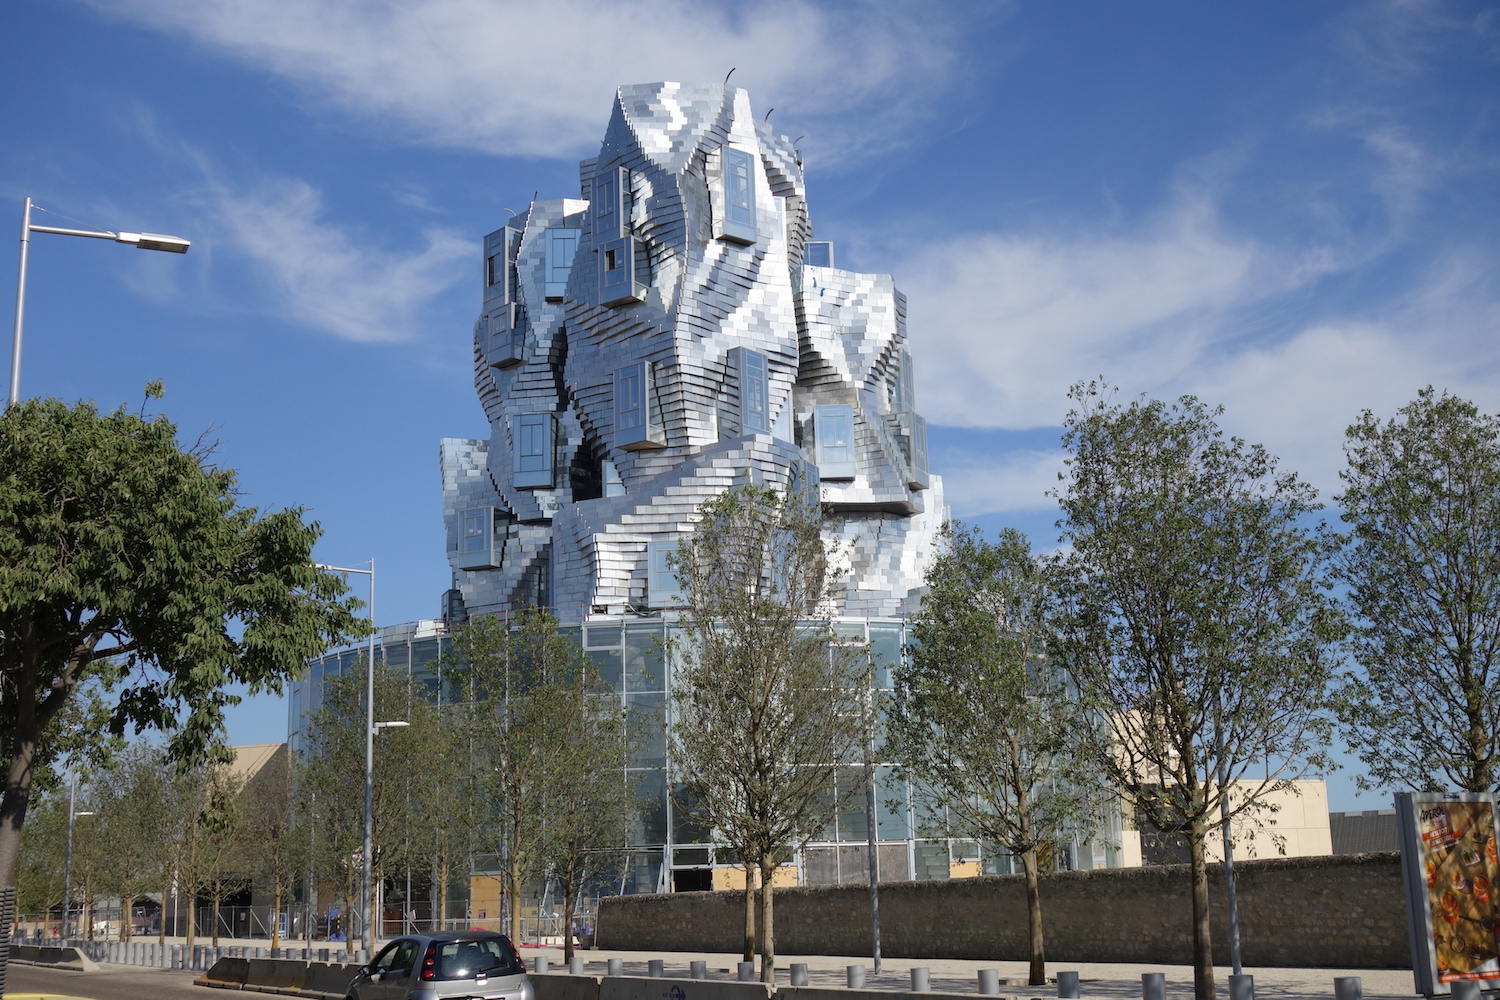 Luma Arles Opening June 26: Reserve Tickets to Visit Frank Gehry’s Second French Renaissance and Triumph.